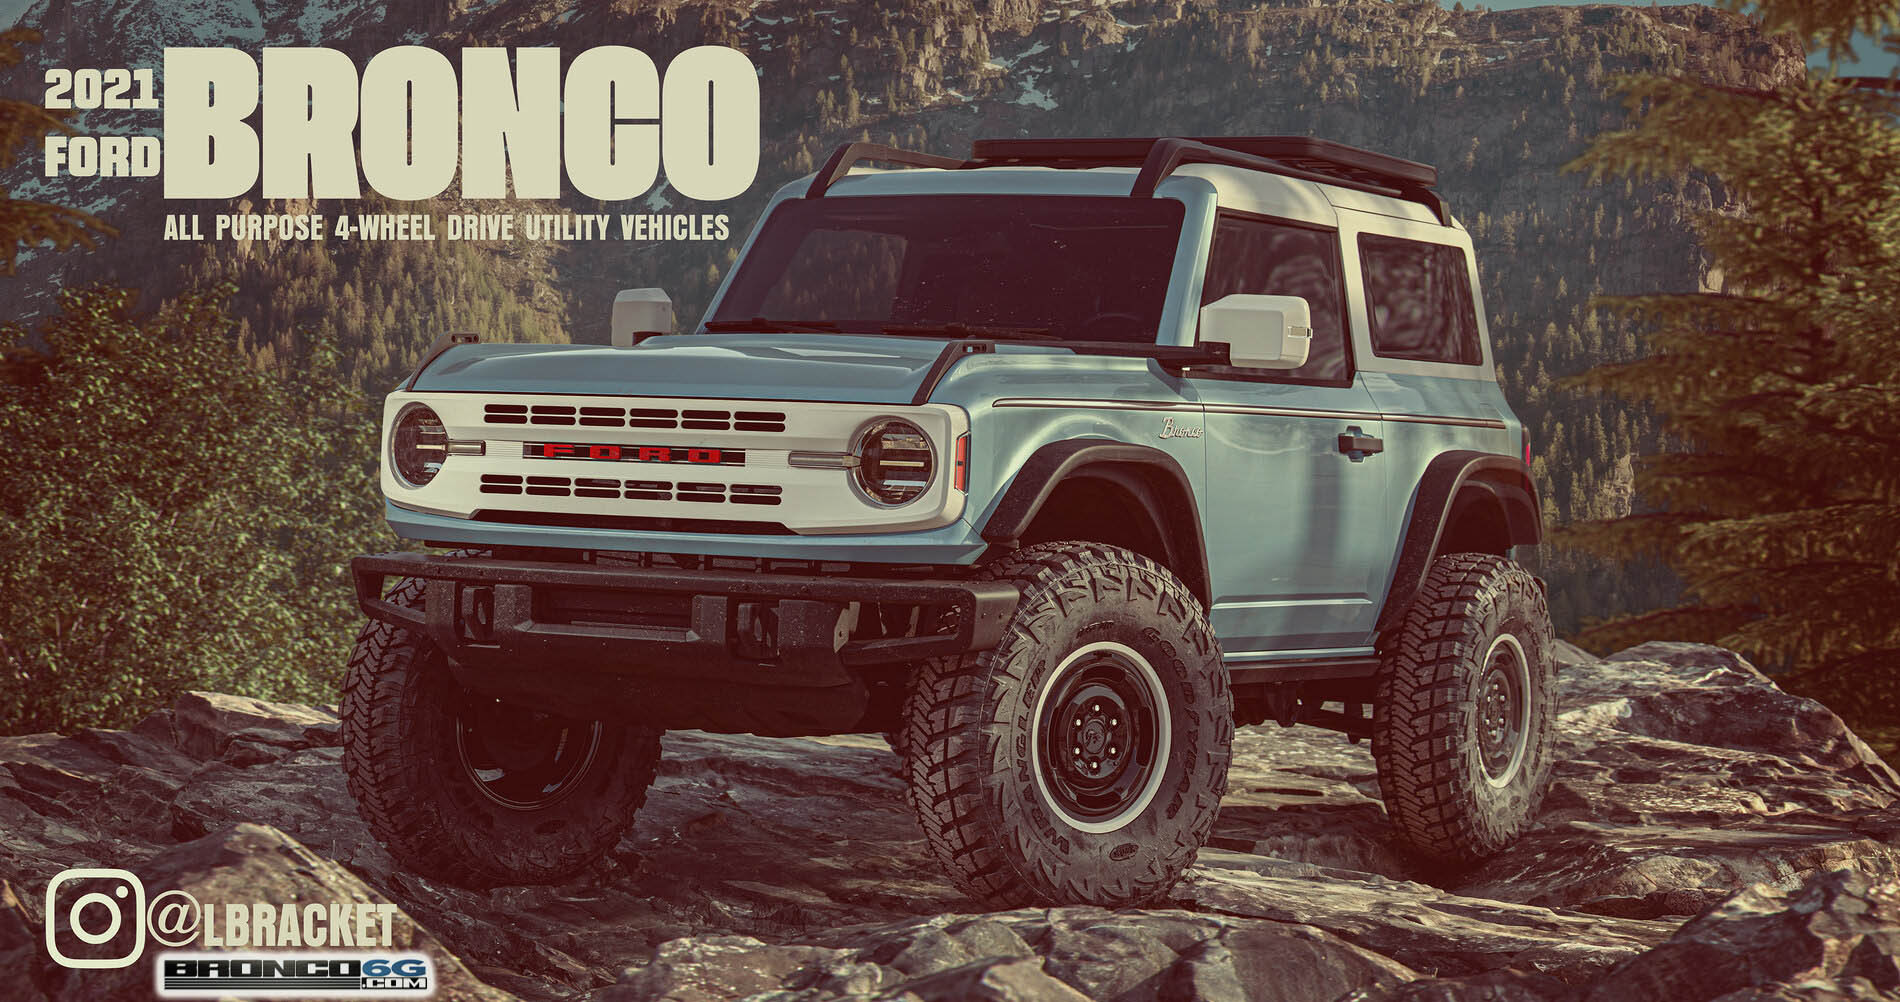 2023 Bronco Heritage Edition Revealed! 1,966 Heritage Limited Edition (Badlands) Units to be